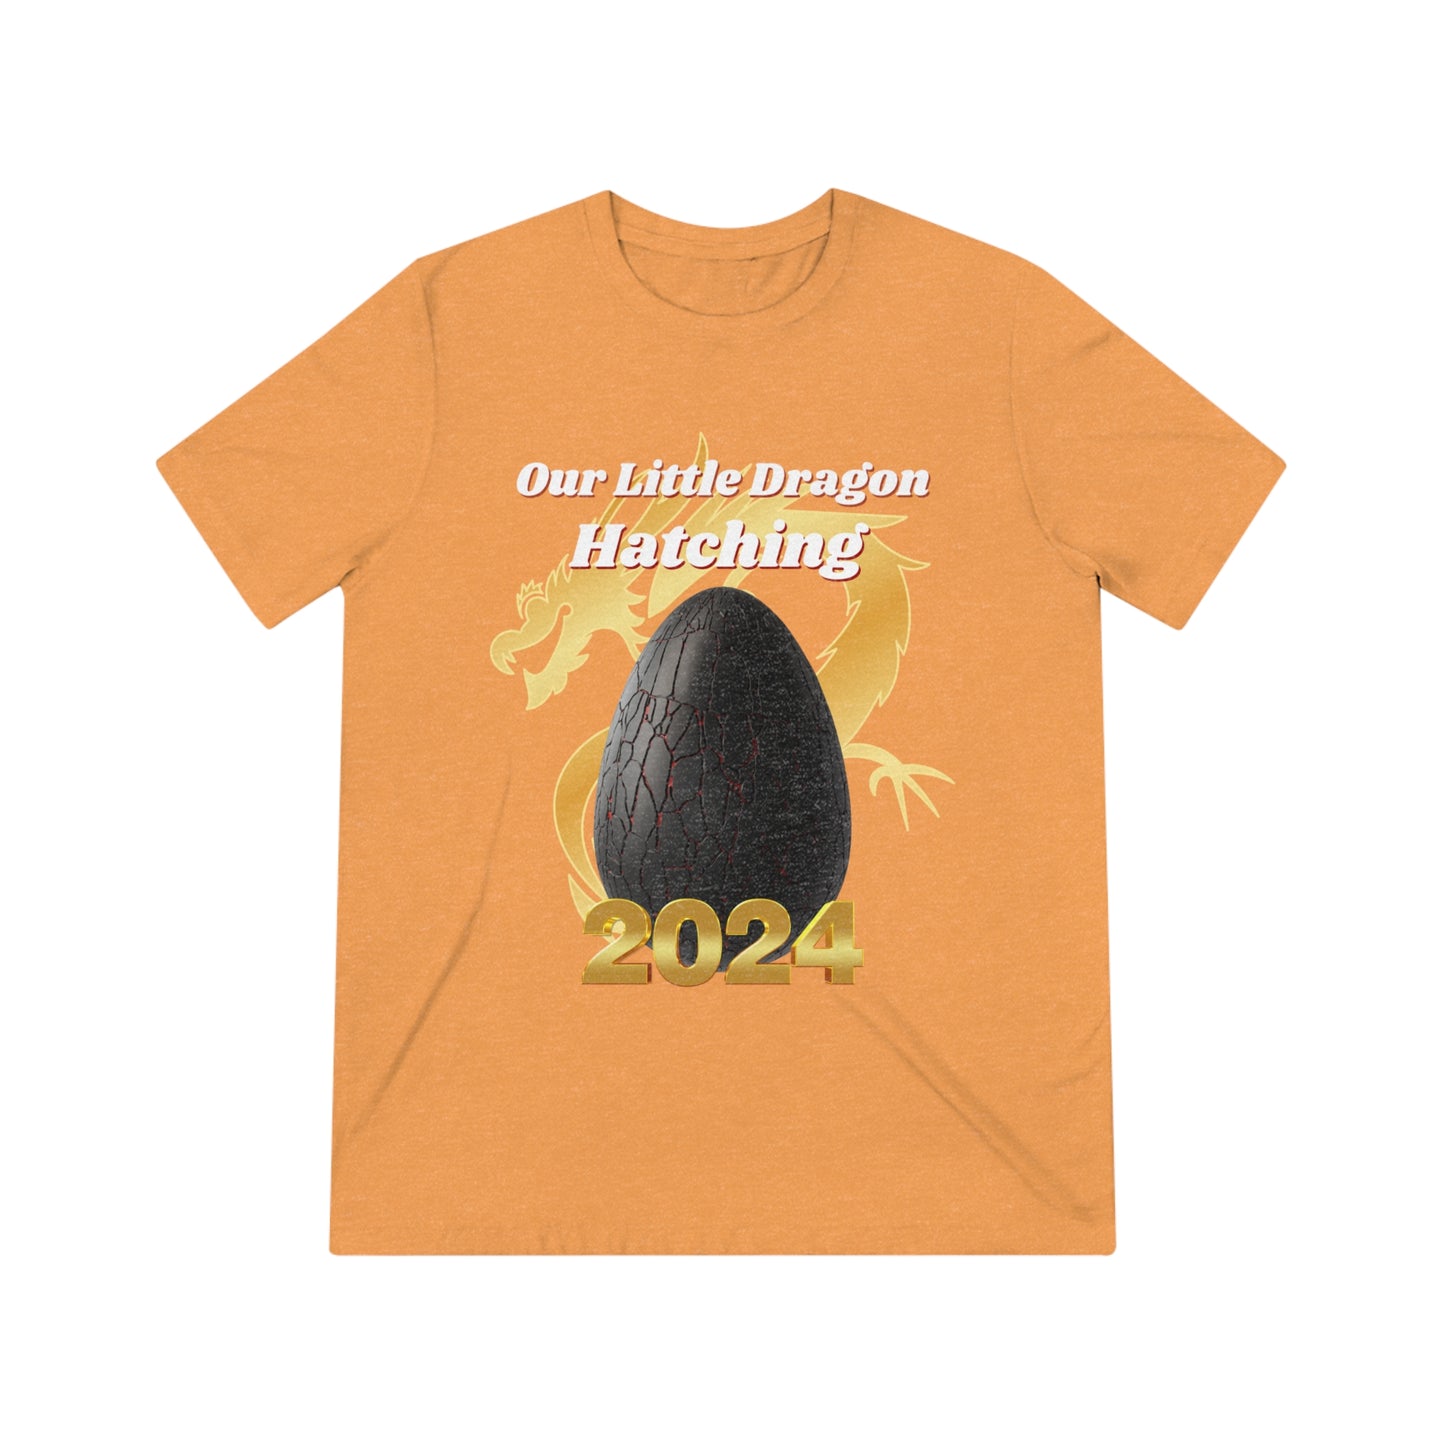 2024 Our Little Dragon Hatching Unisex Triblend Tee